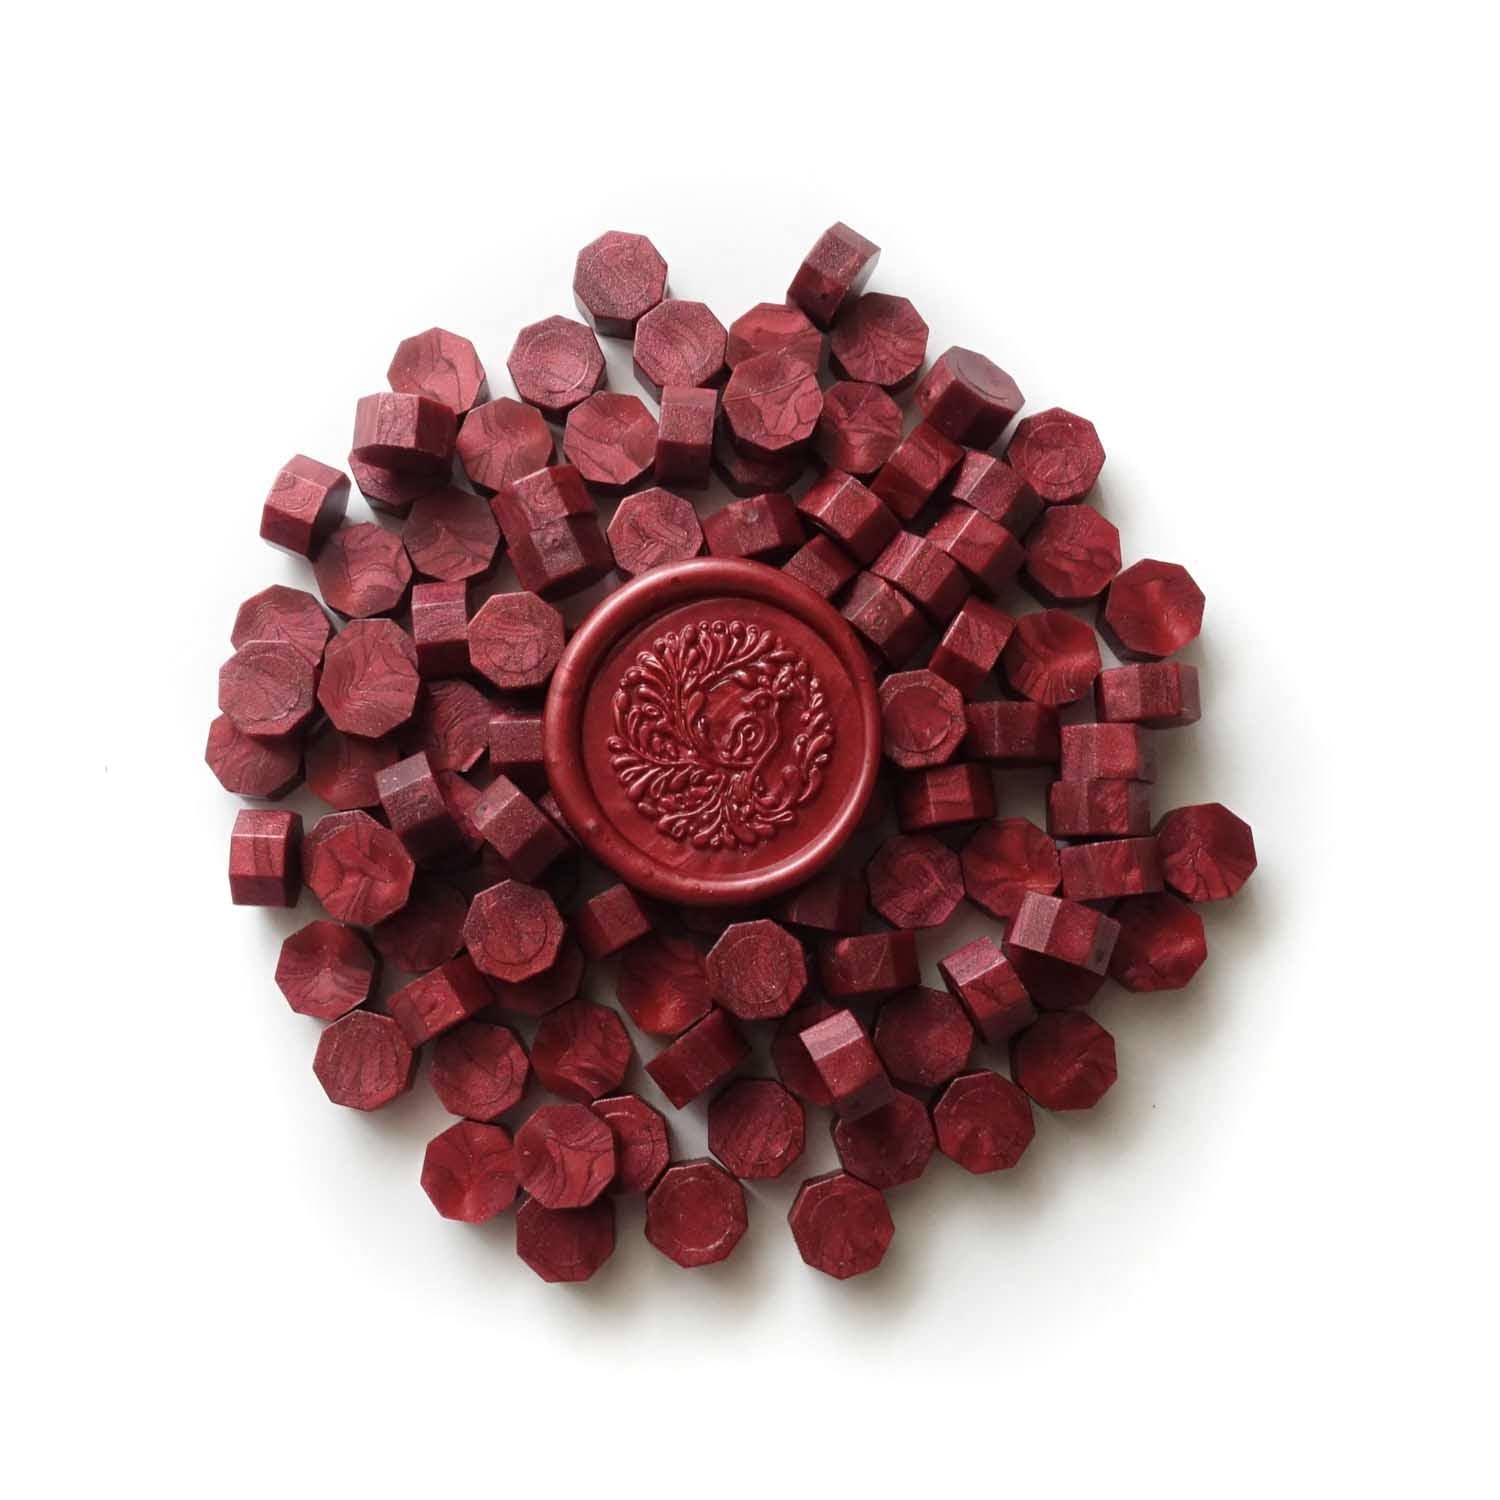 600pcs Wax Seal Beads, Red Wax for Stamp Seals, Premium Sealing Wax Beads